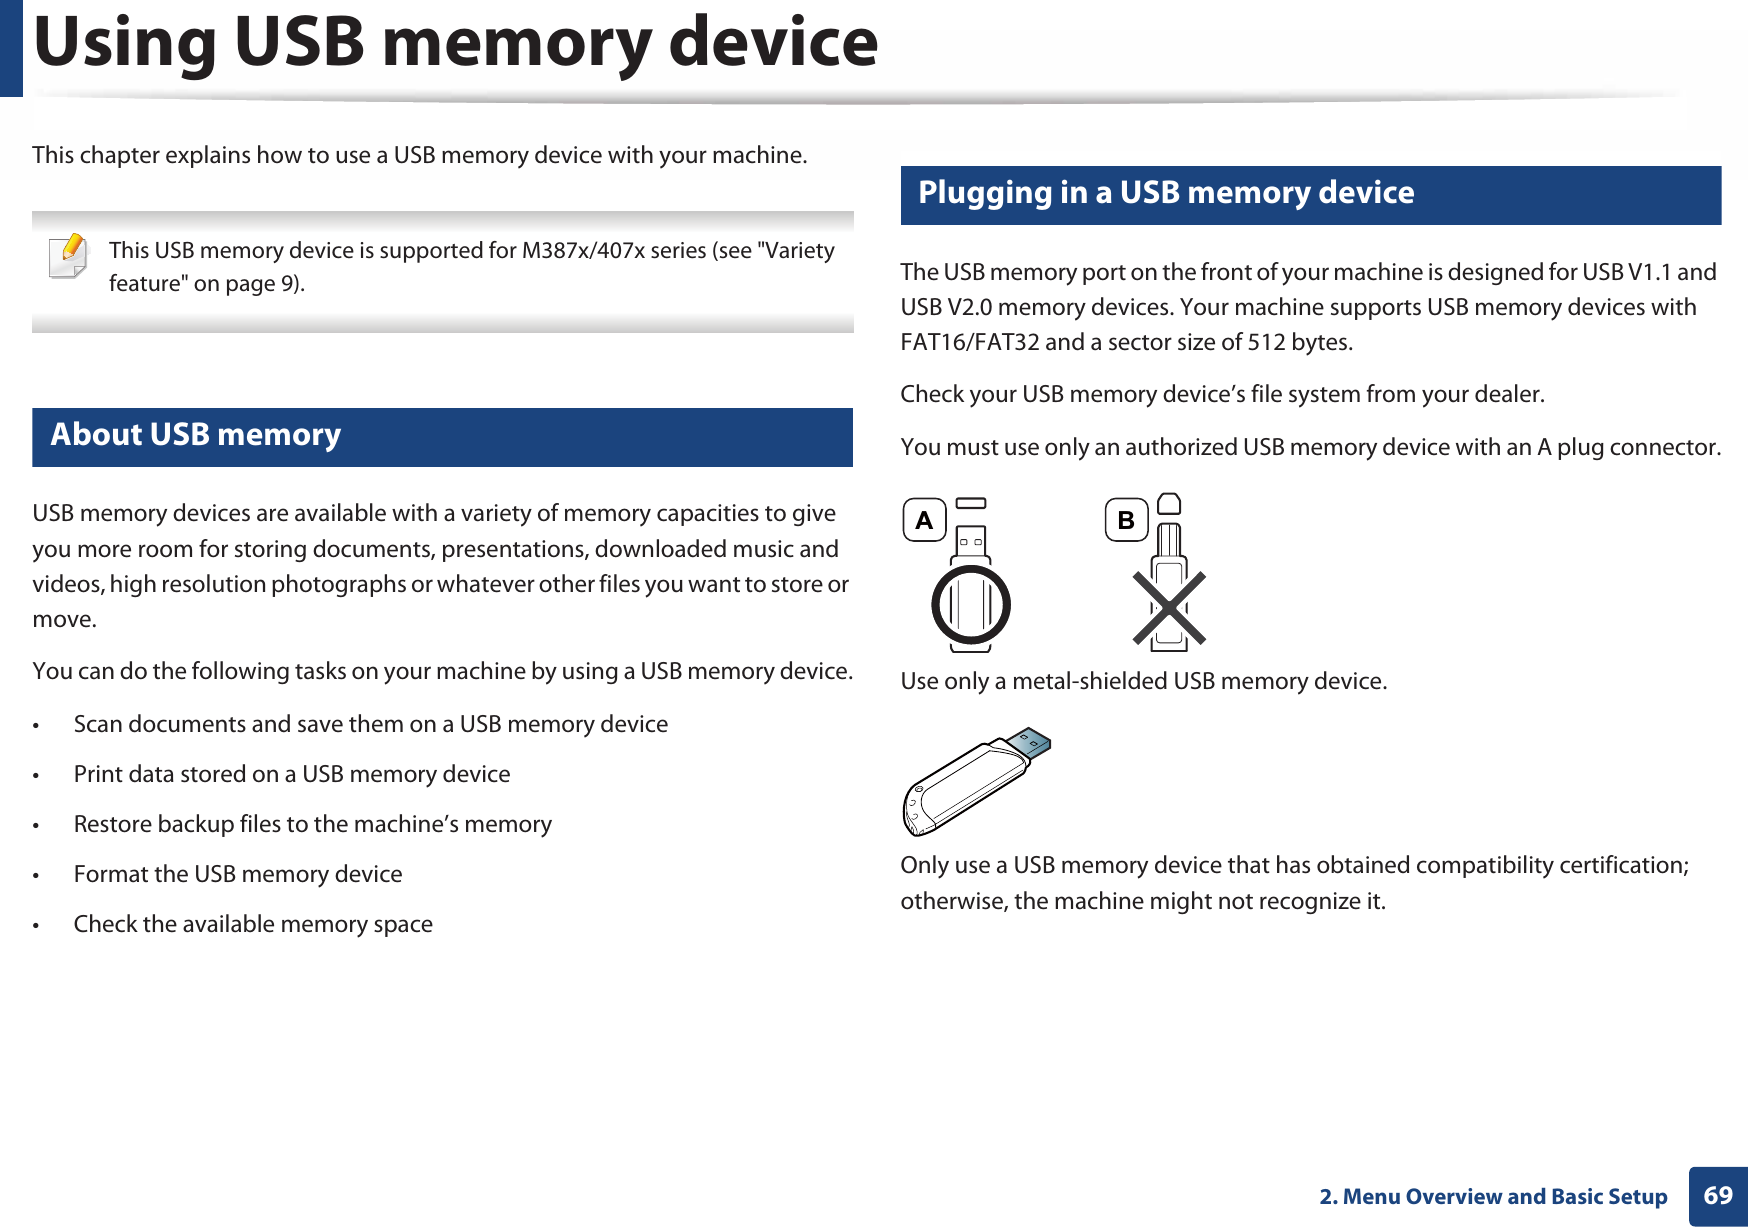 692. Menu Overview and Basic SetupUsing USB memory deviceThis chapter explains how to use a USB memory device with your machine. This USB memory device is supported for M387x/407x series (see &quot;Variety feature&quot; on page 9). 23 About USB memoryUSB memory devices are available with a variety of memory capacities to give you more room for storing documents, presentations, downloaded music and videos, high resolution photographs or whatever other files you want to store or move.You can do the following tasks on your machine by using a USB memory device.• Scan documents and save them on a USB memory device• Print data stored on a USB memory device• Restore backup files to the machine’s memory• Format the USB memory device• Check the available memory space24 Plugging in a USB memory deviceThe USB memory port on the front of your machine is designed for USB V1.1 and USB V2.0 memory devices. Your machine supports USB memory devices with FAT16/FAT32 and a sector size of 512 bytes.Check your USB memory device’s file system from your dealer.You must use only an authorized USB memory device with an A plug connector.Use only a metal-shielded USB memory device.Only use a USB memory device that has obtained compatibility certification; otherwise, the machine might not recognize it.A B